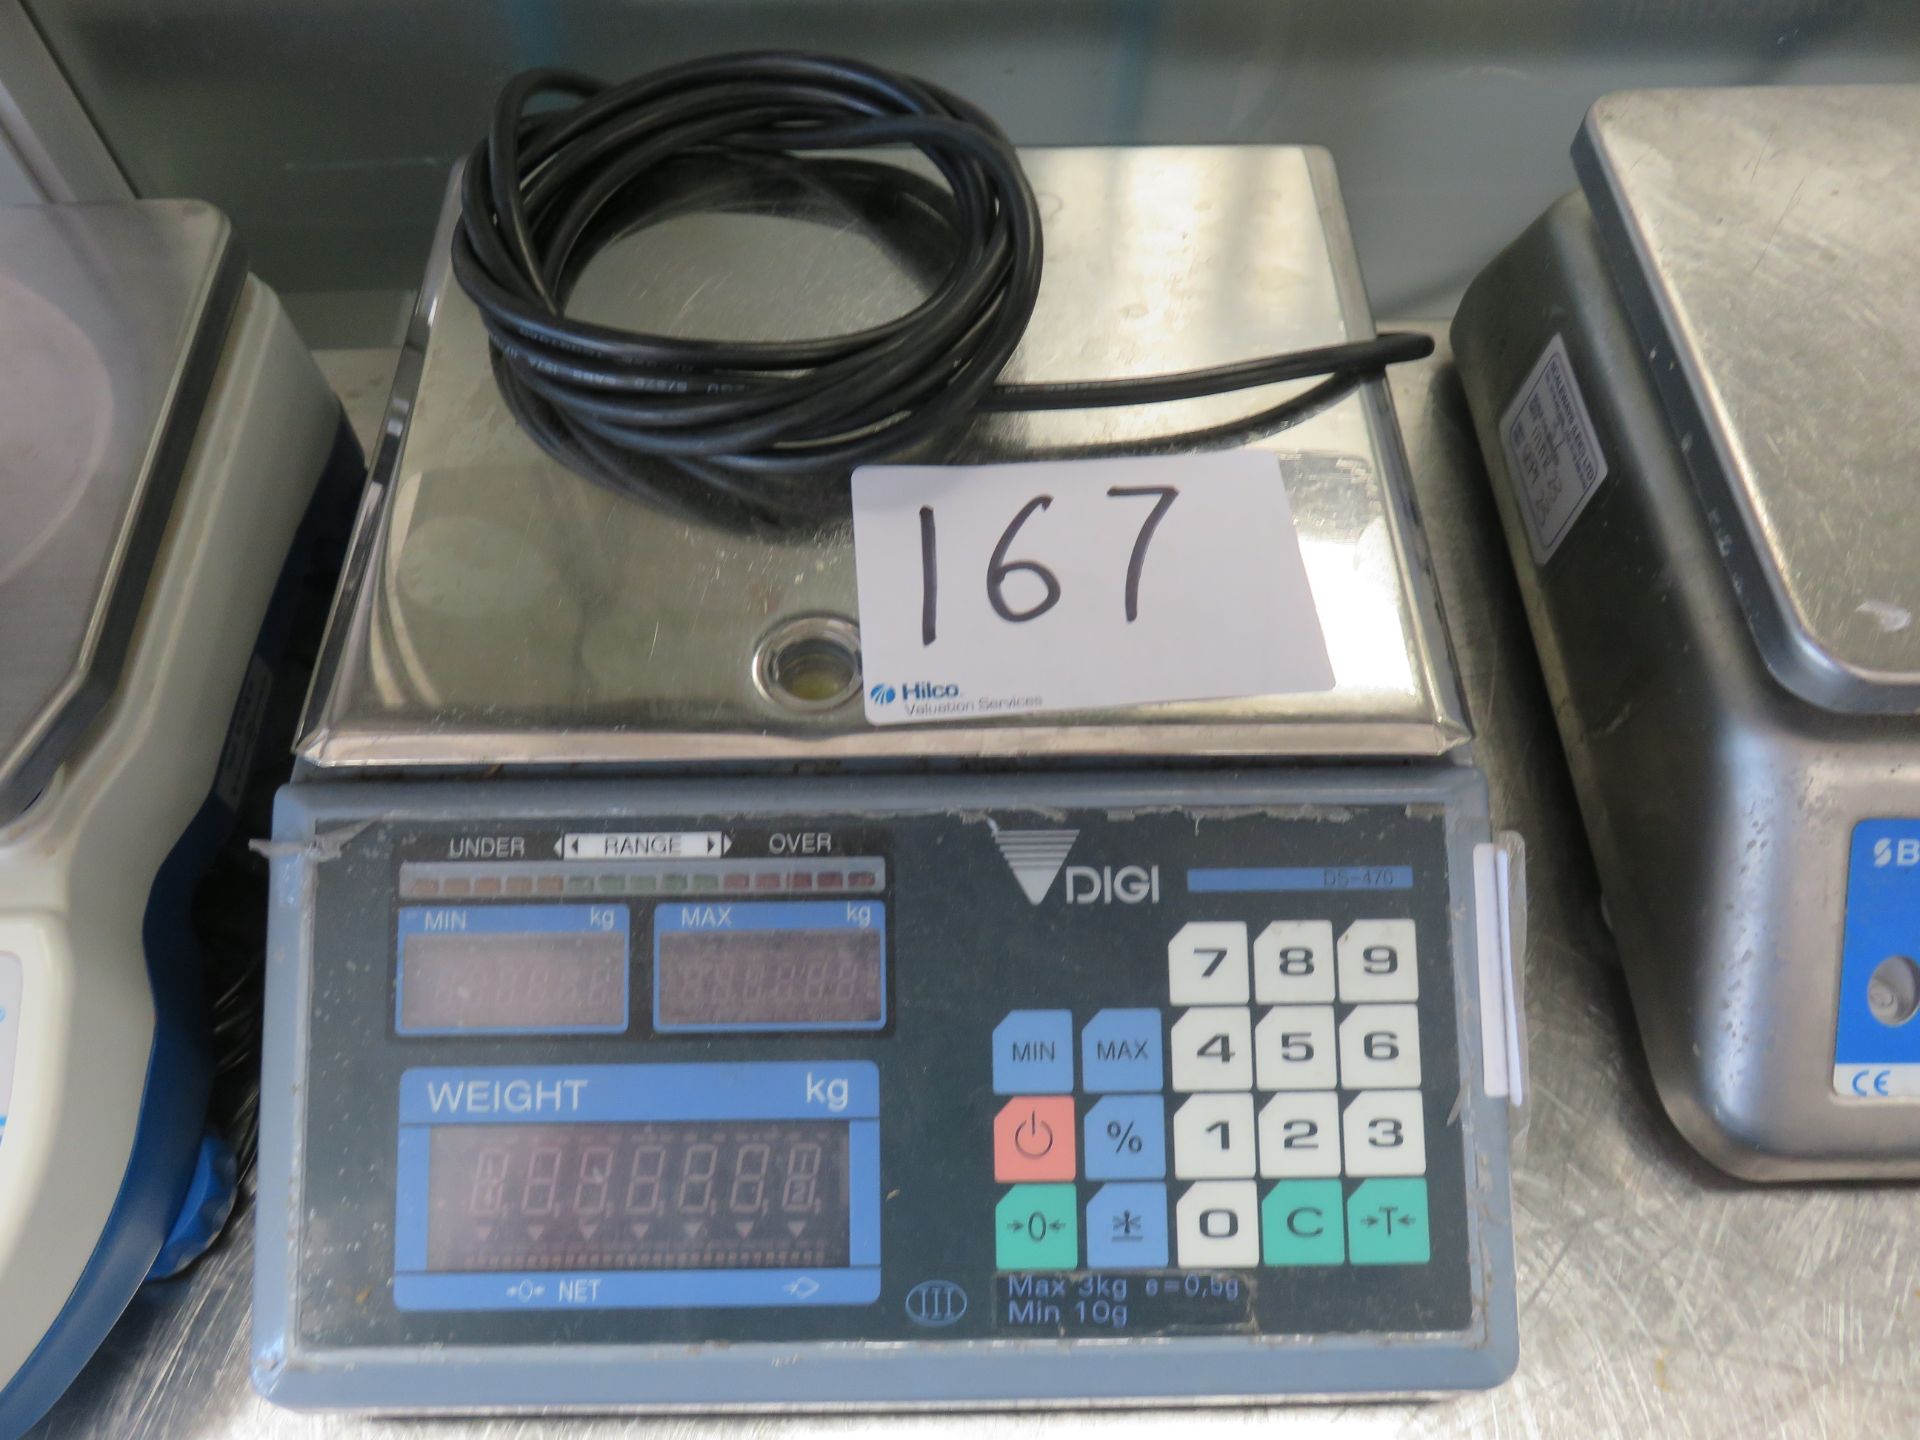 1, Digi DS-470 Digital Scales. Serial No. 0541744 with Max 3kg 0=0.5g Capacity